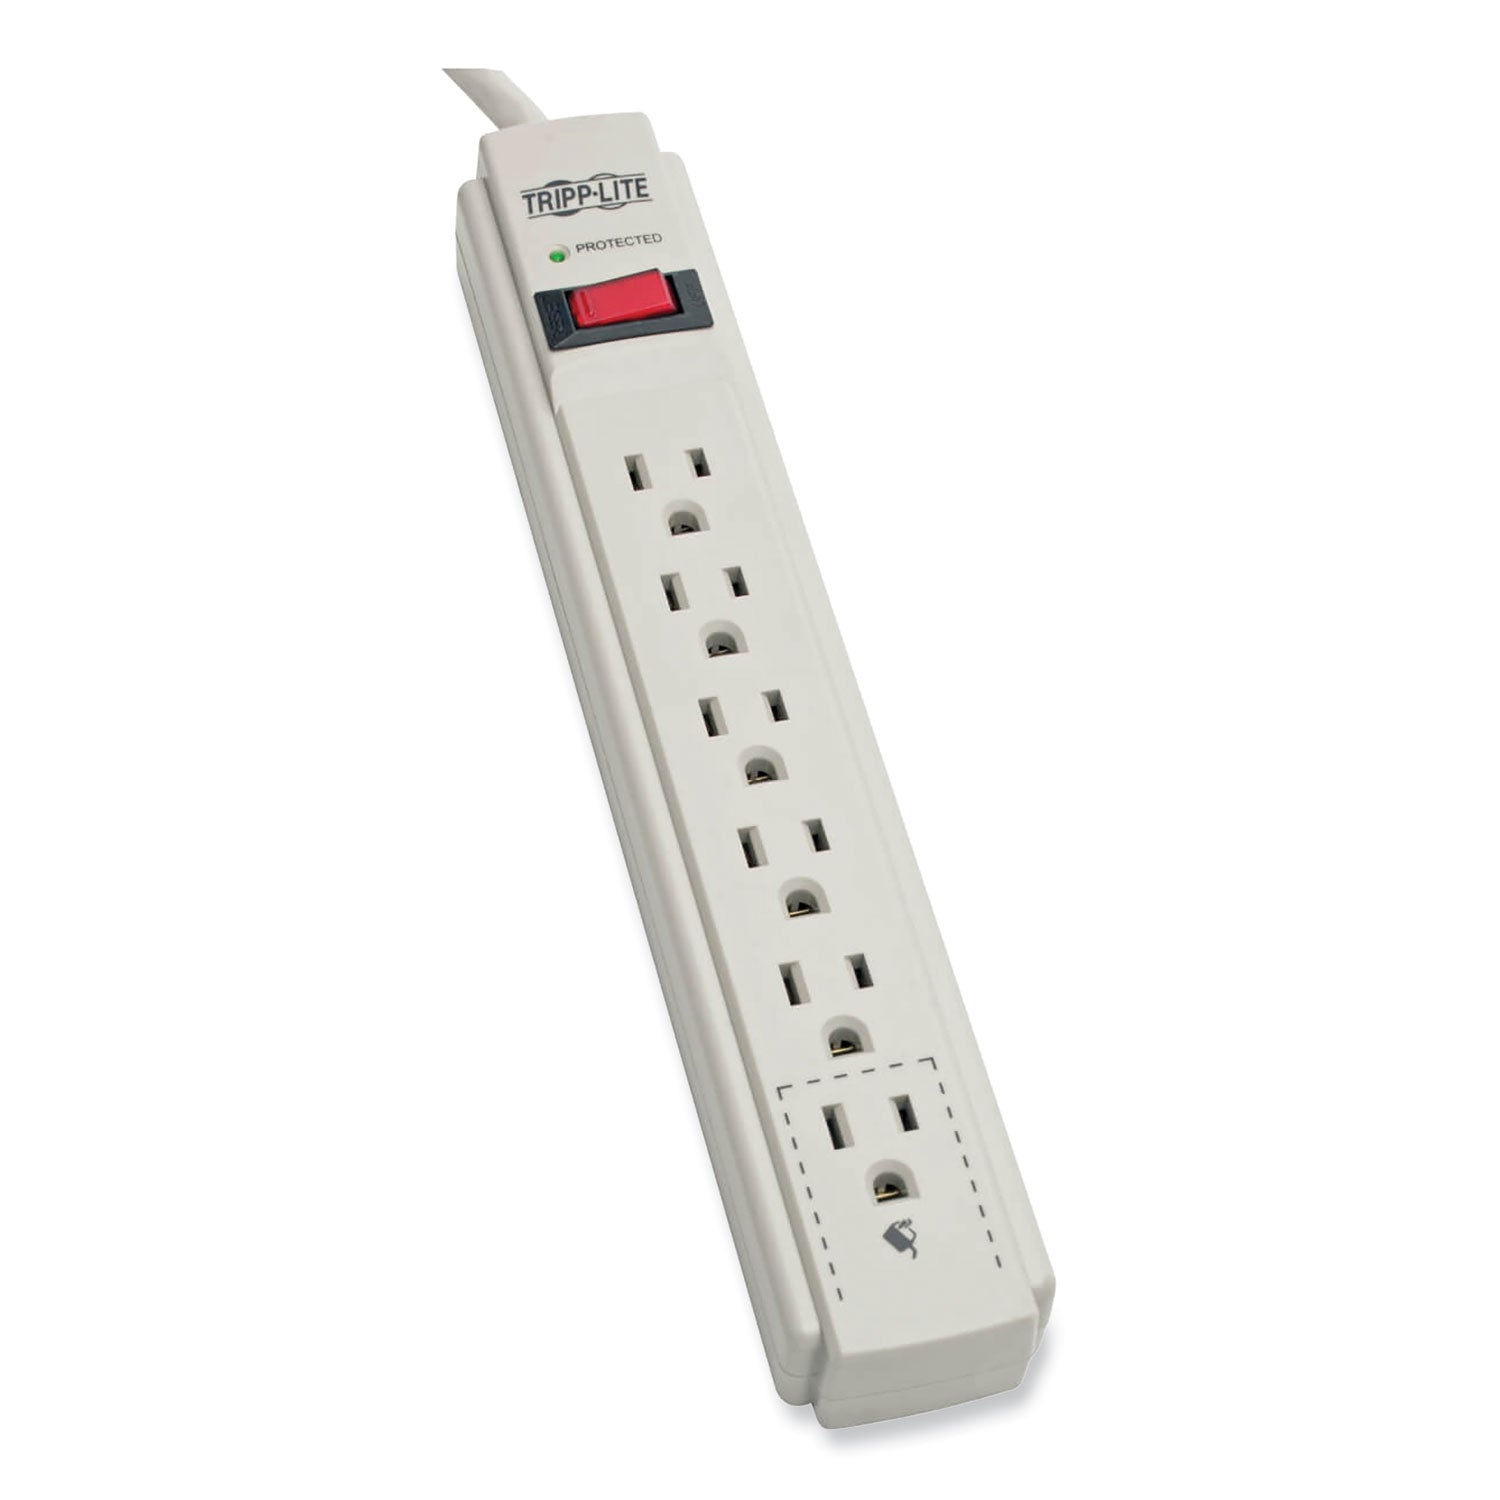 Protect It! Surge Protector, 6 AC Outlets, 4 ft Cord, 790 J, Light Gray - 